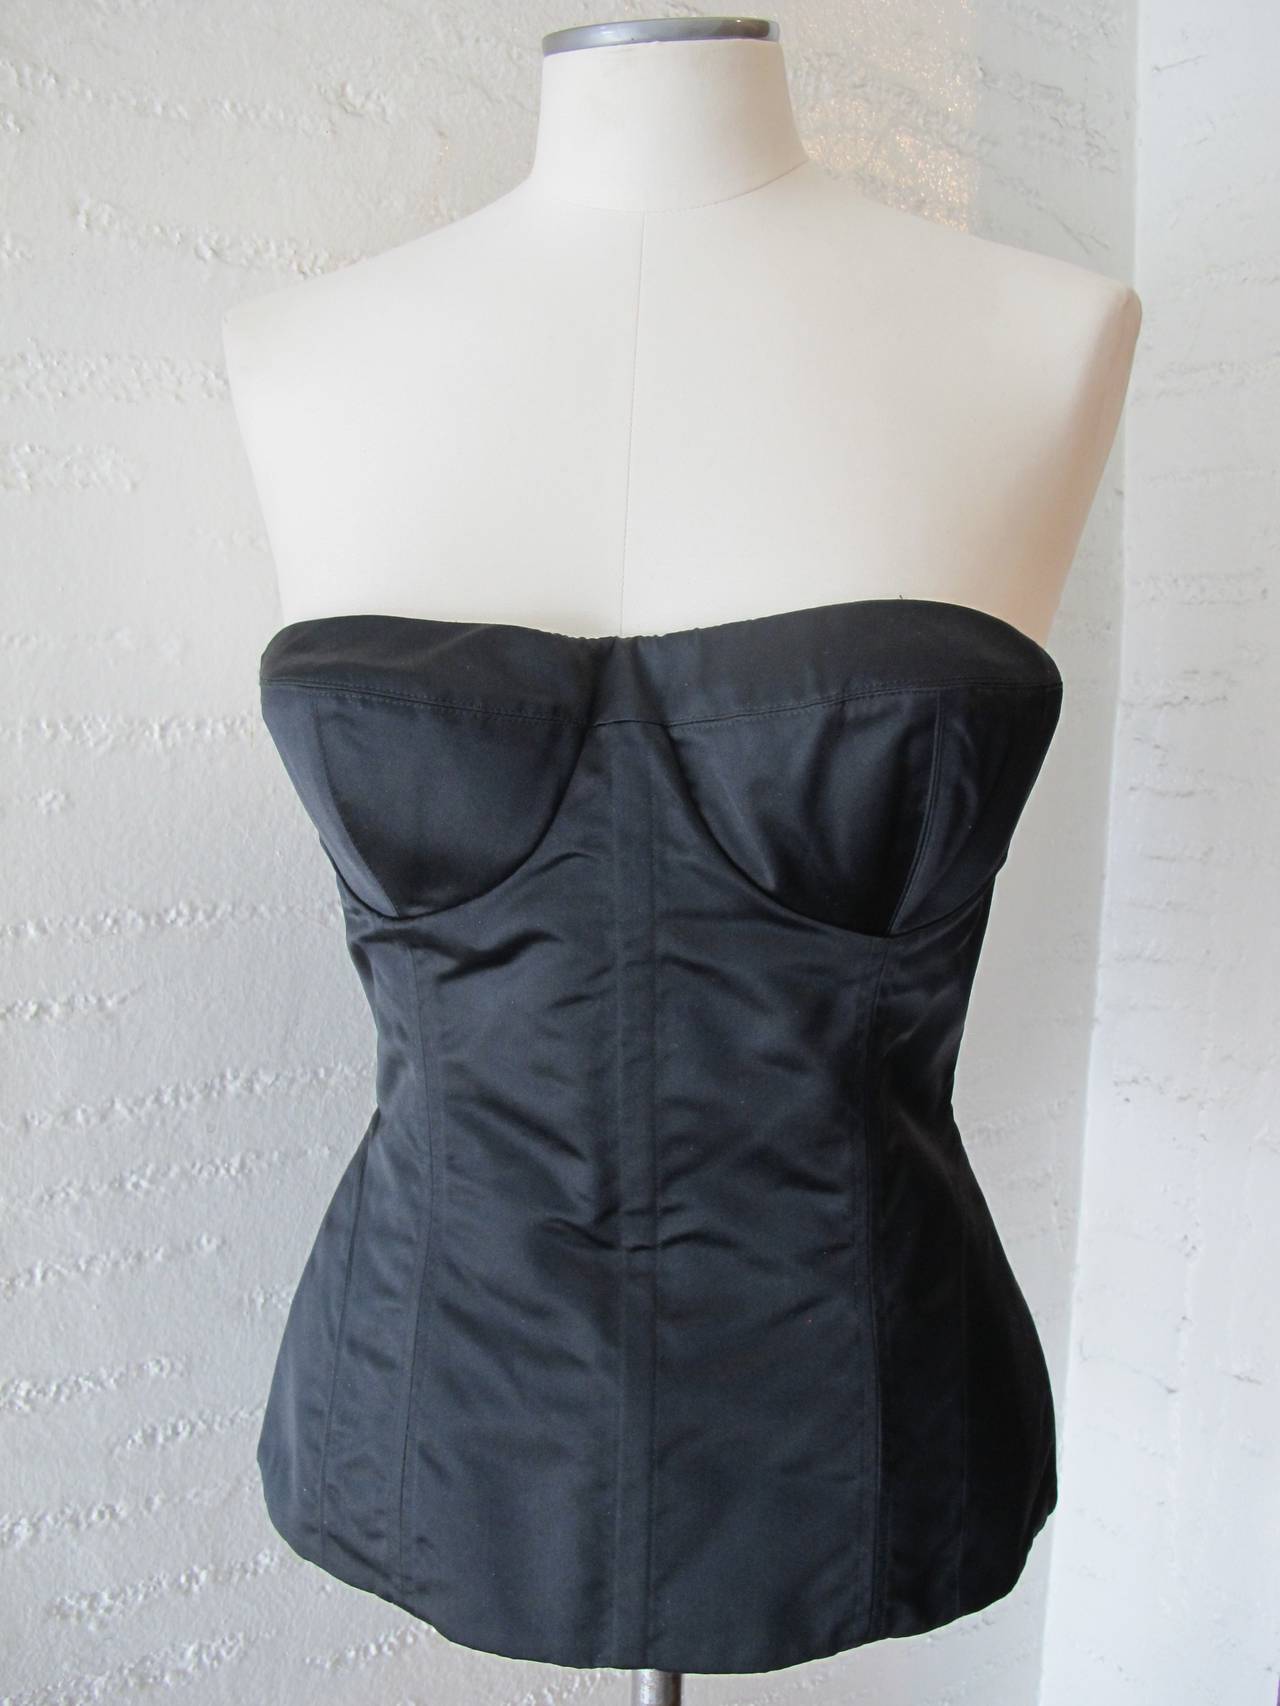 Tom Ford for Gucci Black Bustier and Matching Slacks For Sale 1